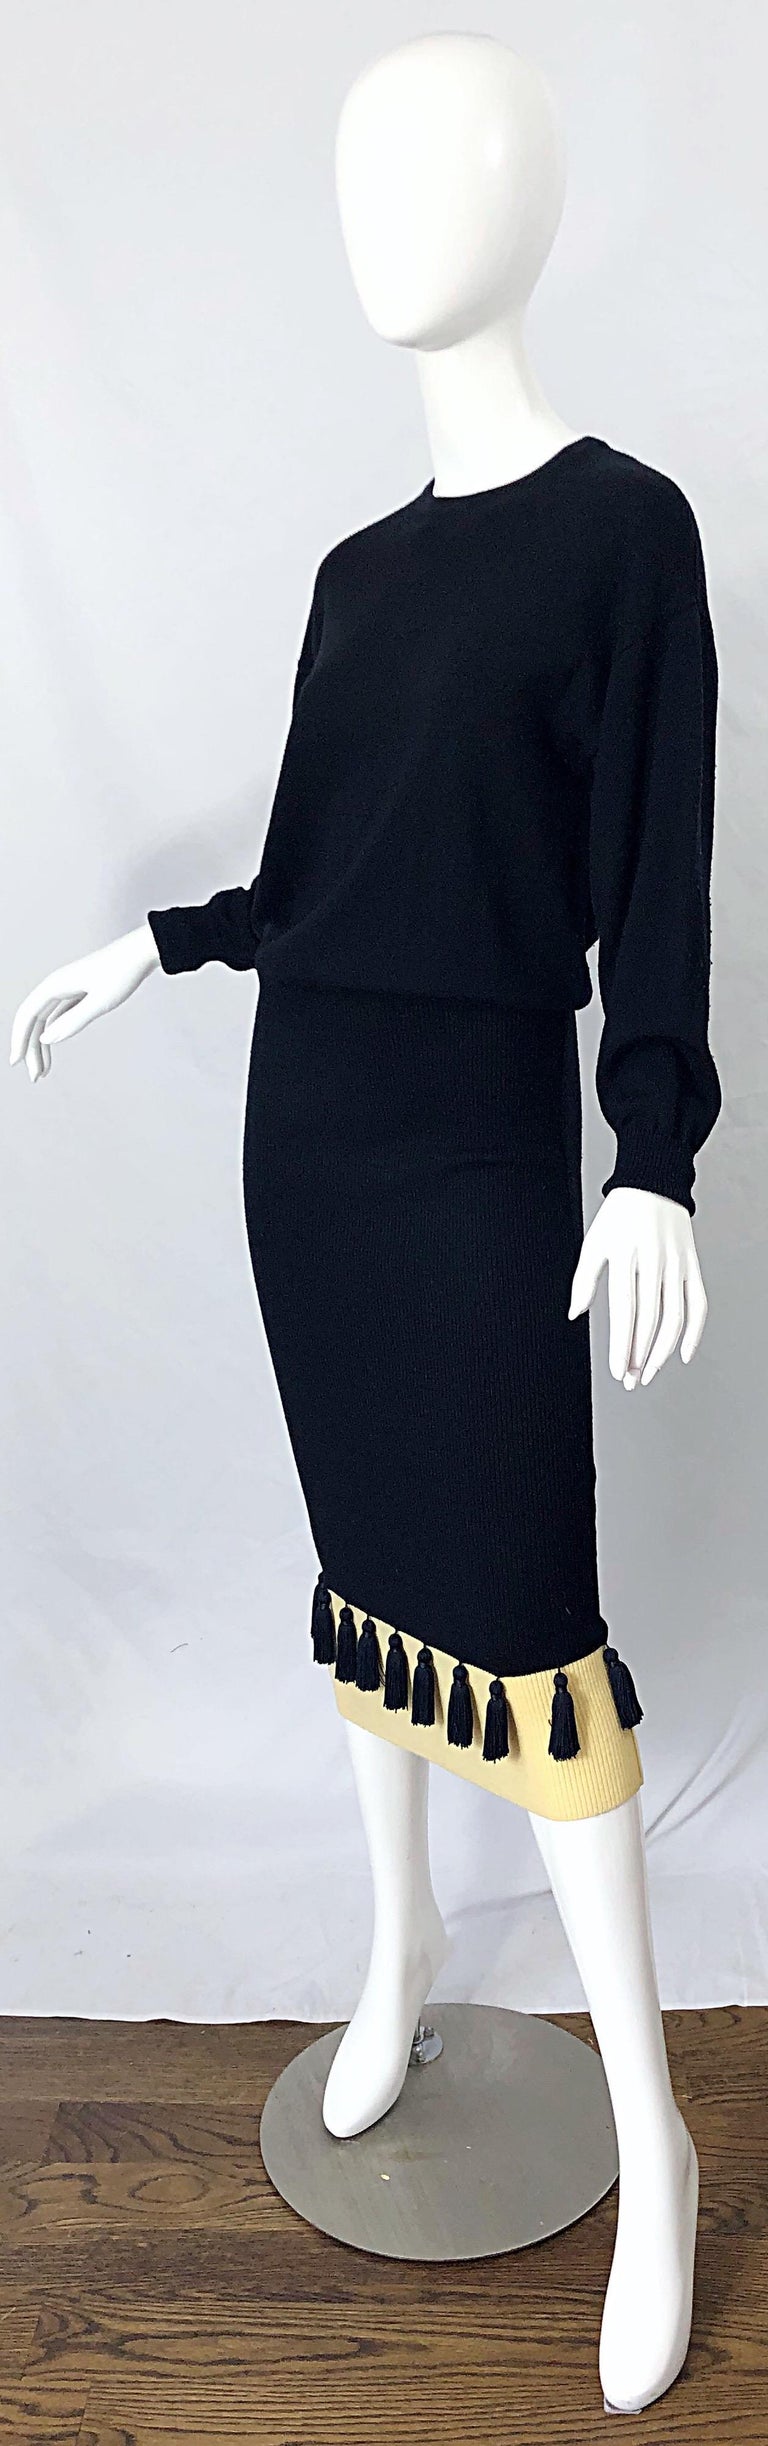 1980s Angelo Tarlazzi Black and Ivory Wool Dolman Sleeve 80s Sweater Dress For Sale 1